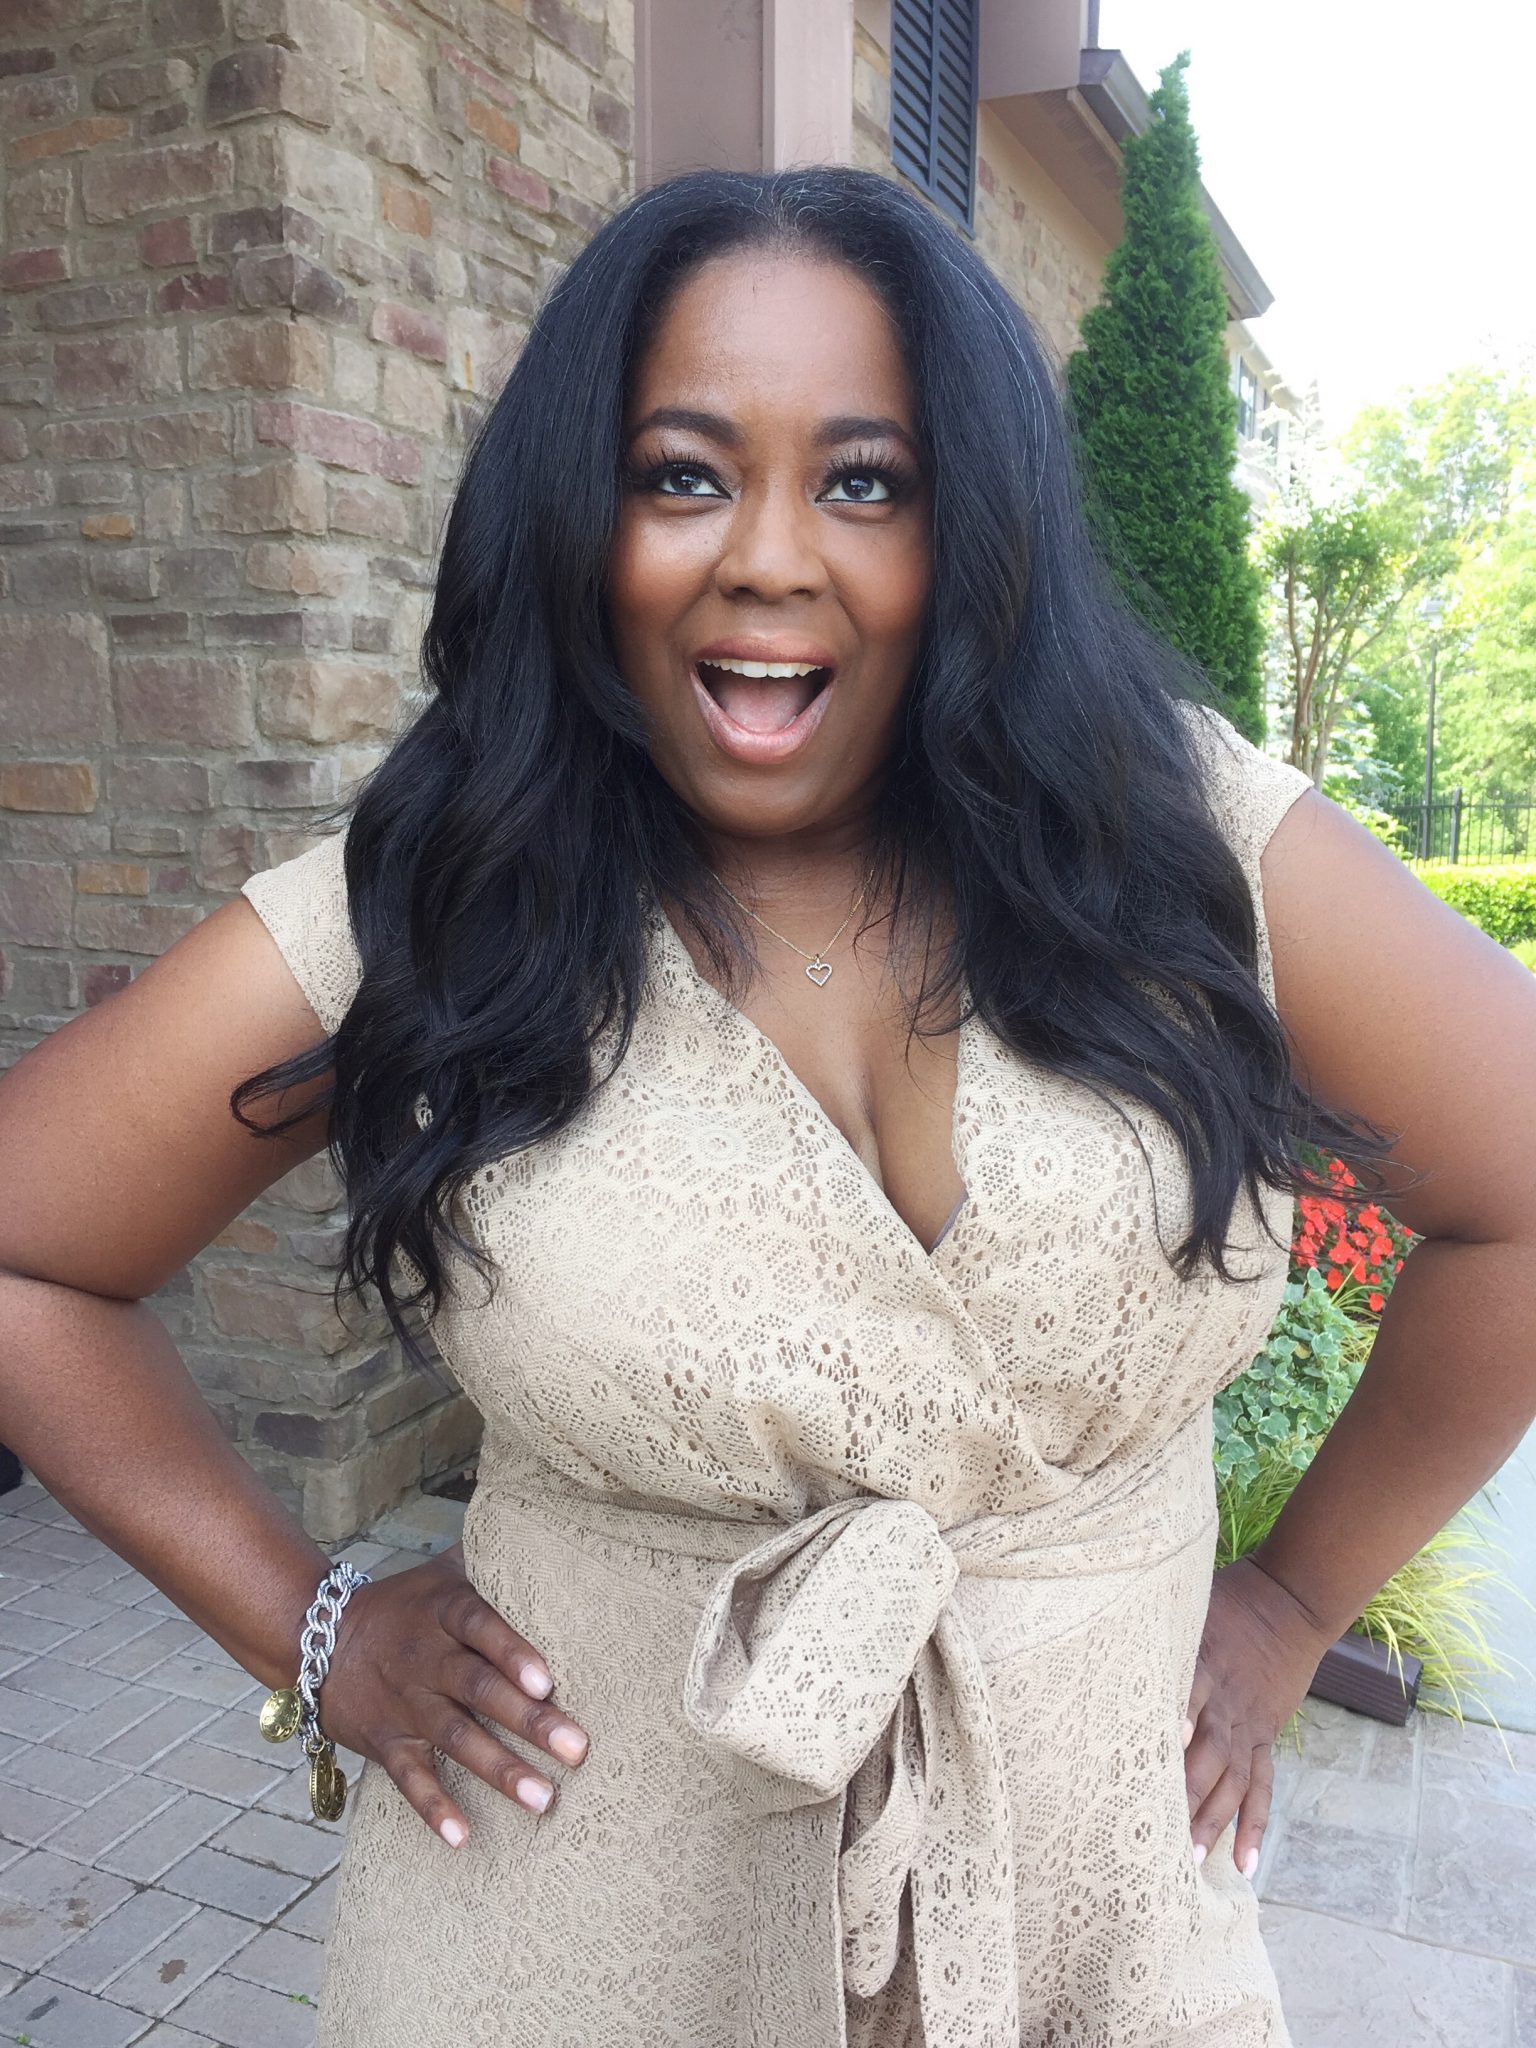 Styling Sunday: Talking With Tami’s Belt Front Jumpsuit